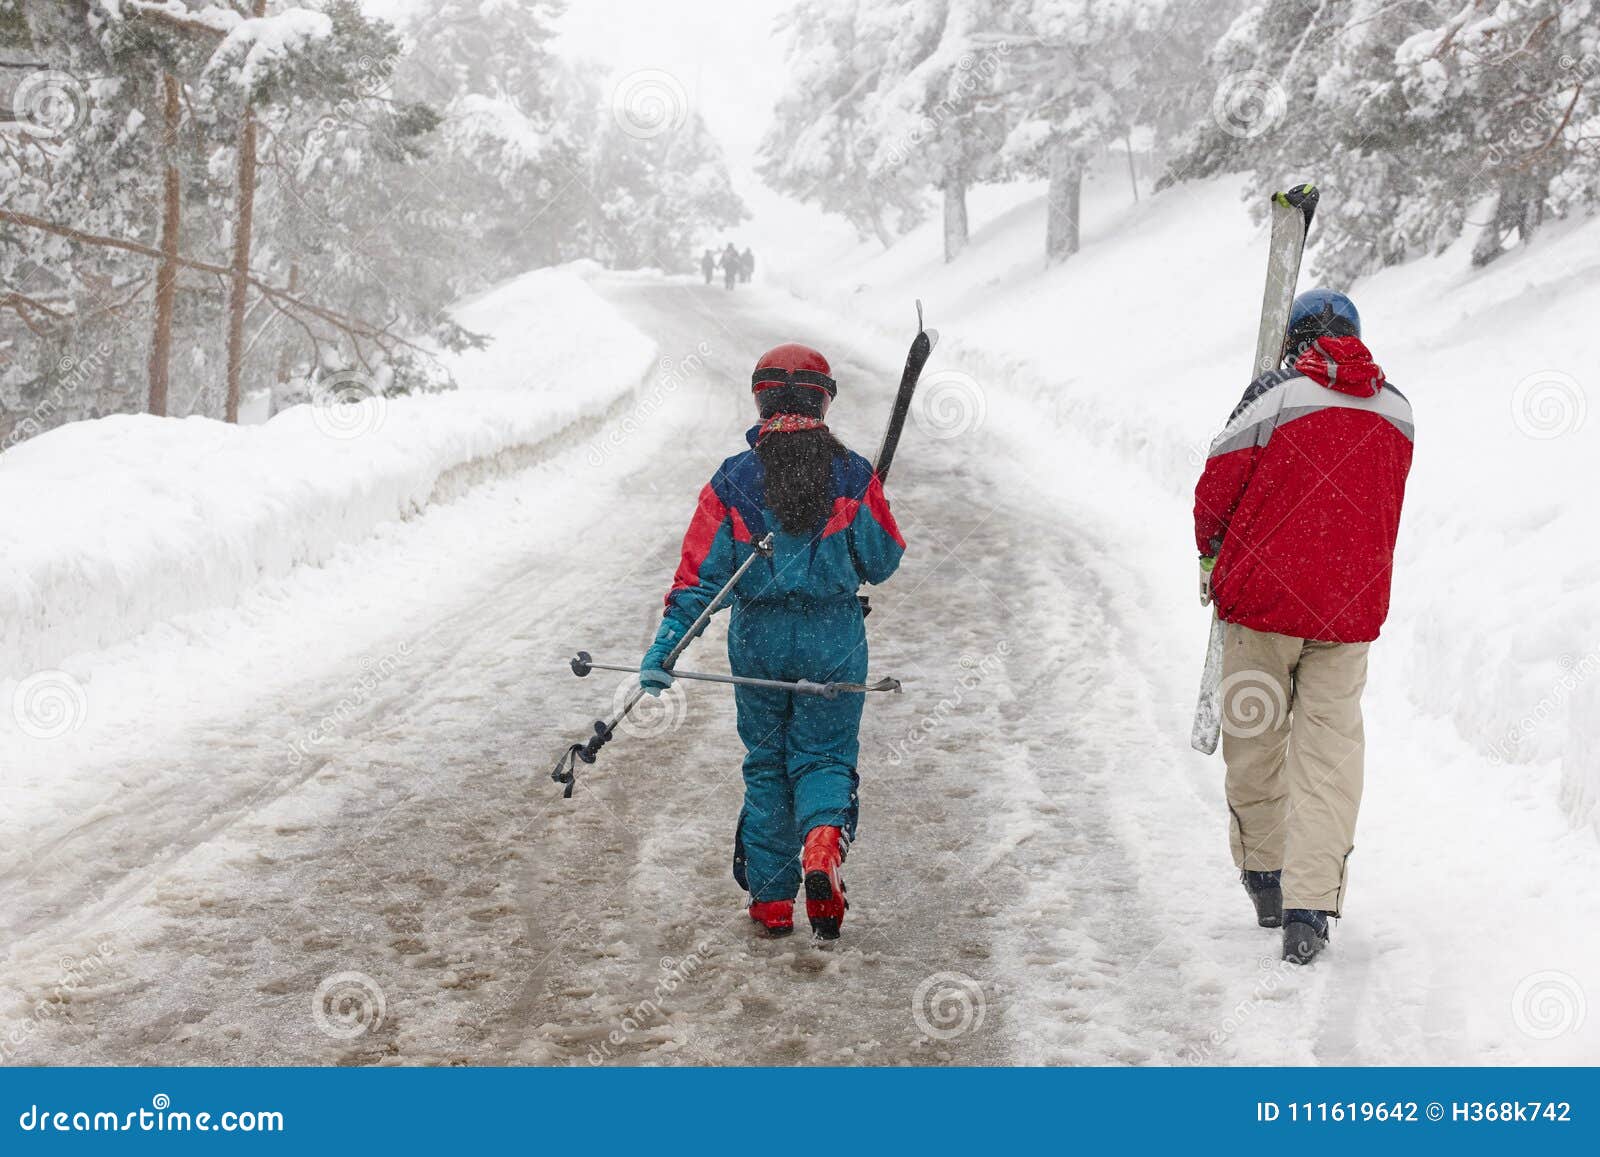 Couple of Skiers on a Snowy Pathway. Winter Sports Stock Photo - Image ...